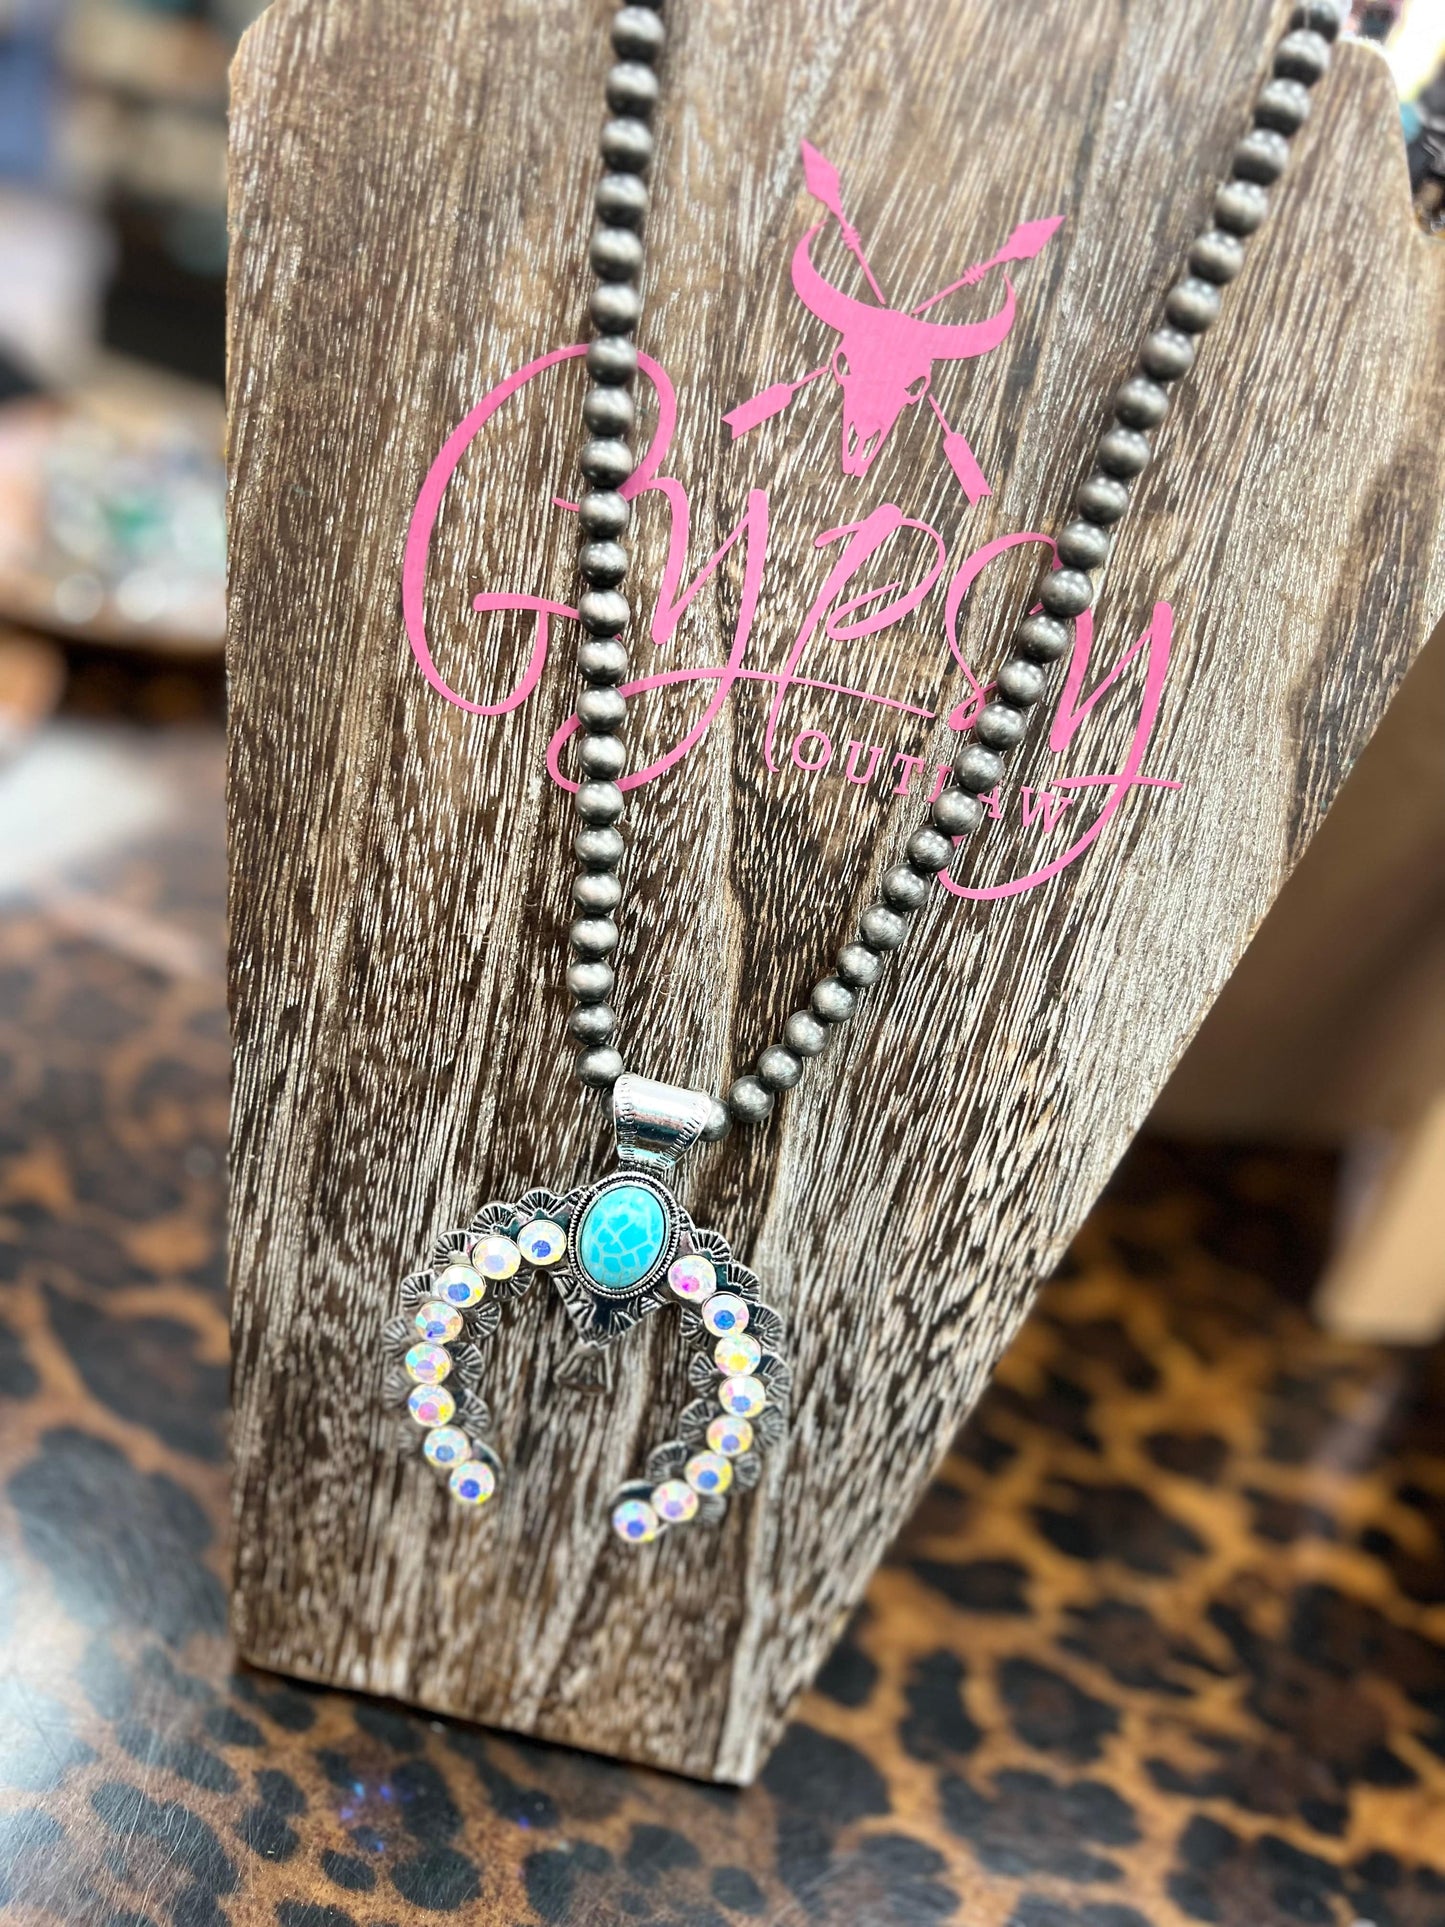 A Cowgirls Fave Necklace